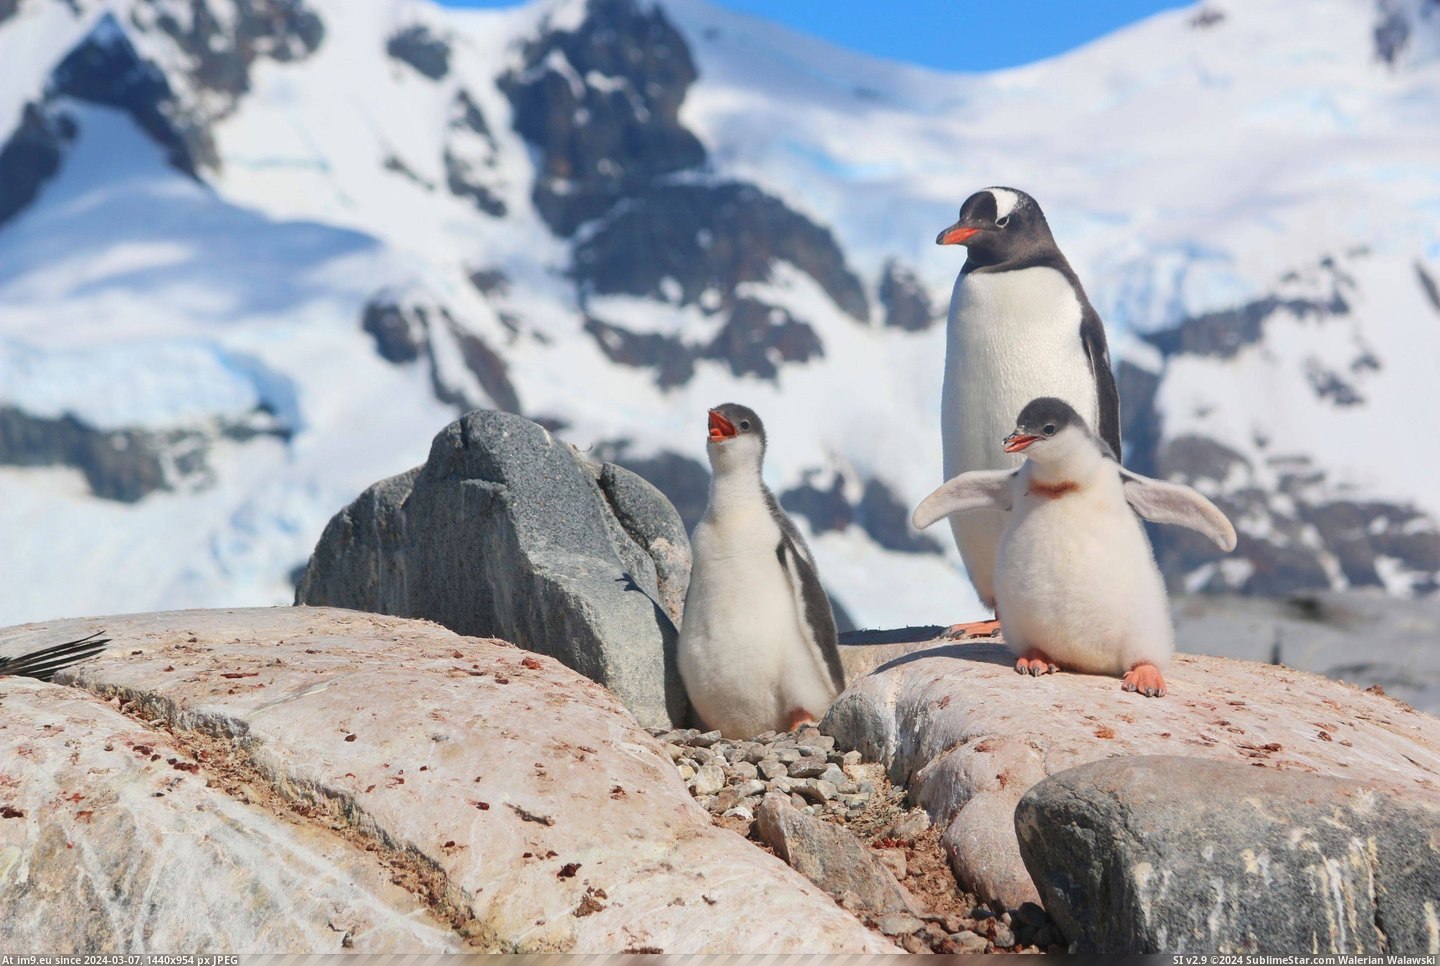 #Wallpaper #Beautiful #Happy #Snow #Highres #Antarctica #Opportunity #Family #Month #Ran #Visit [Aww] Last month I had the opportunity to visit Antarctica, where I ran into this happy family! Pic. (Obraz z album My r/AWW favs))